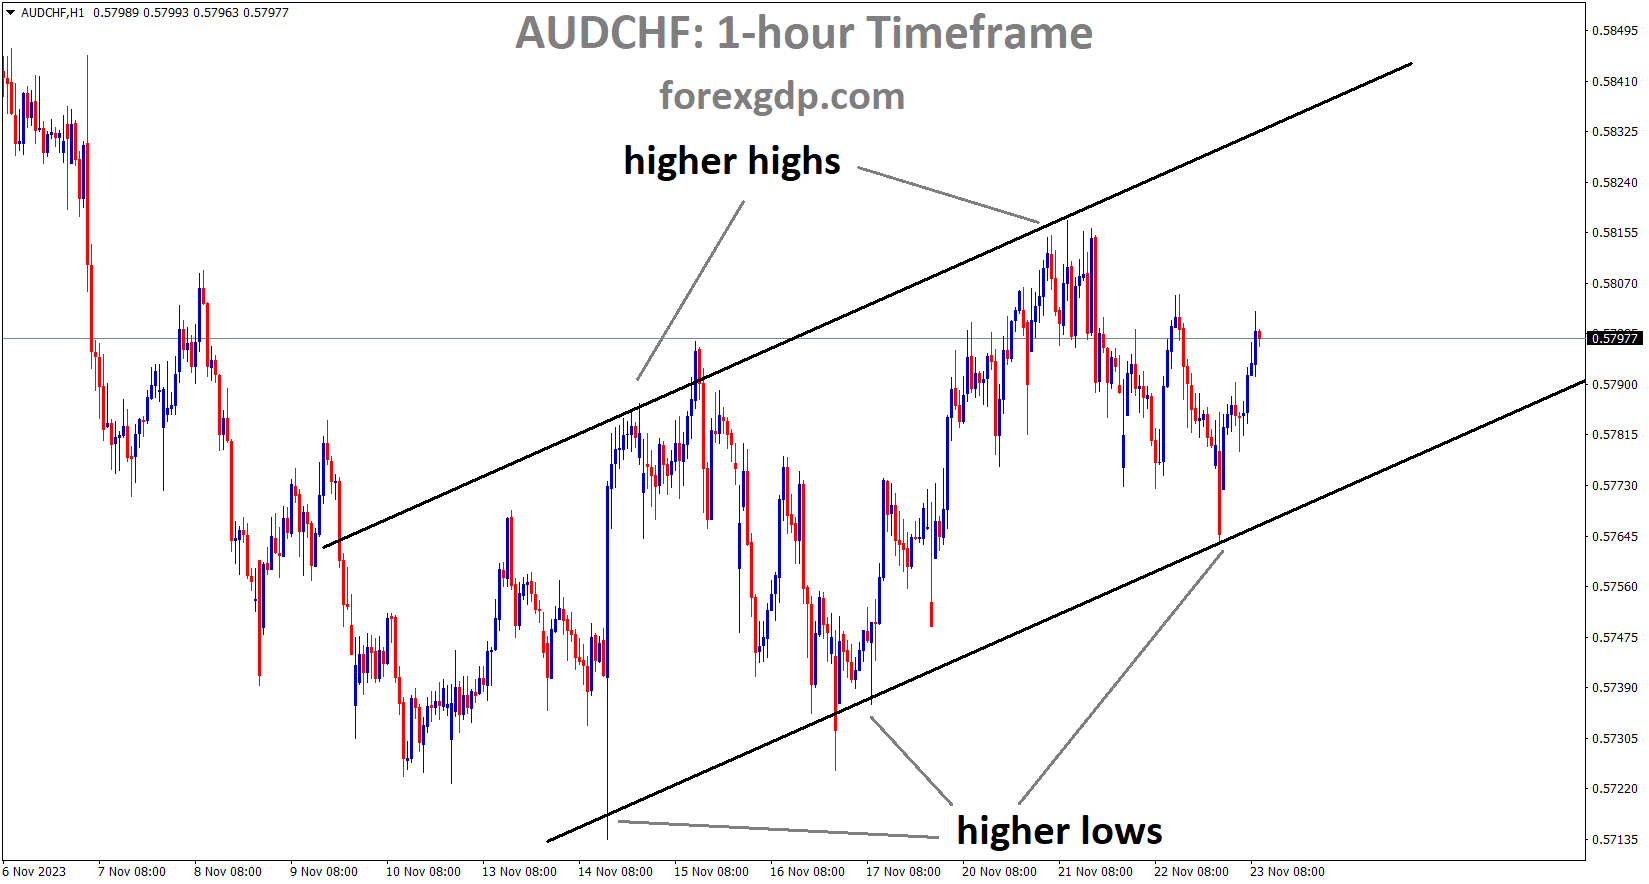 AUDCHF is moving in an Ascending channel and the market has rebounded from the higher low area of the channel